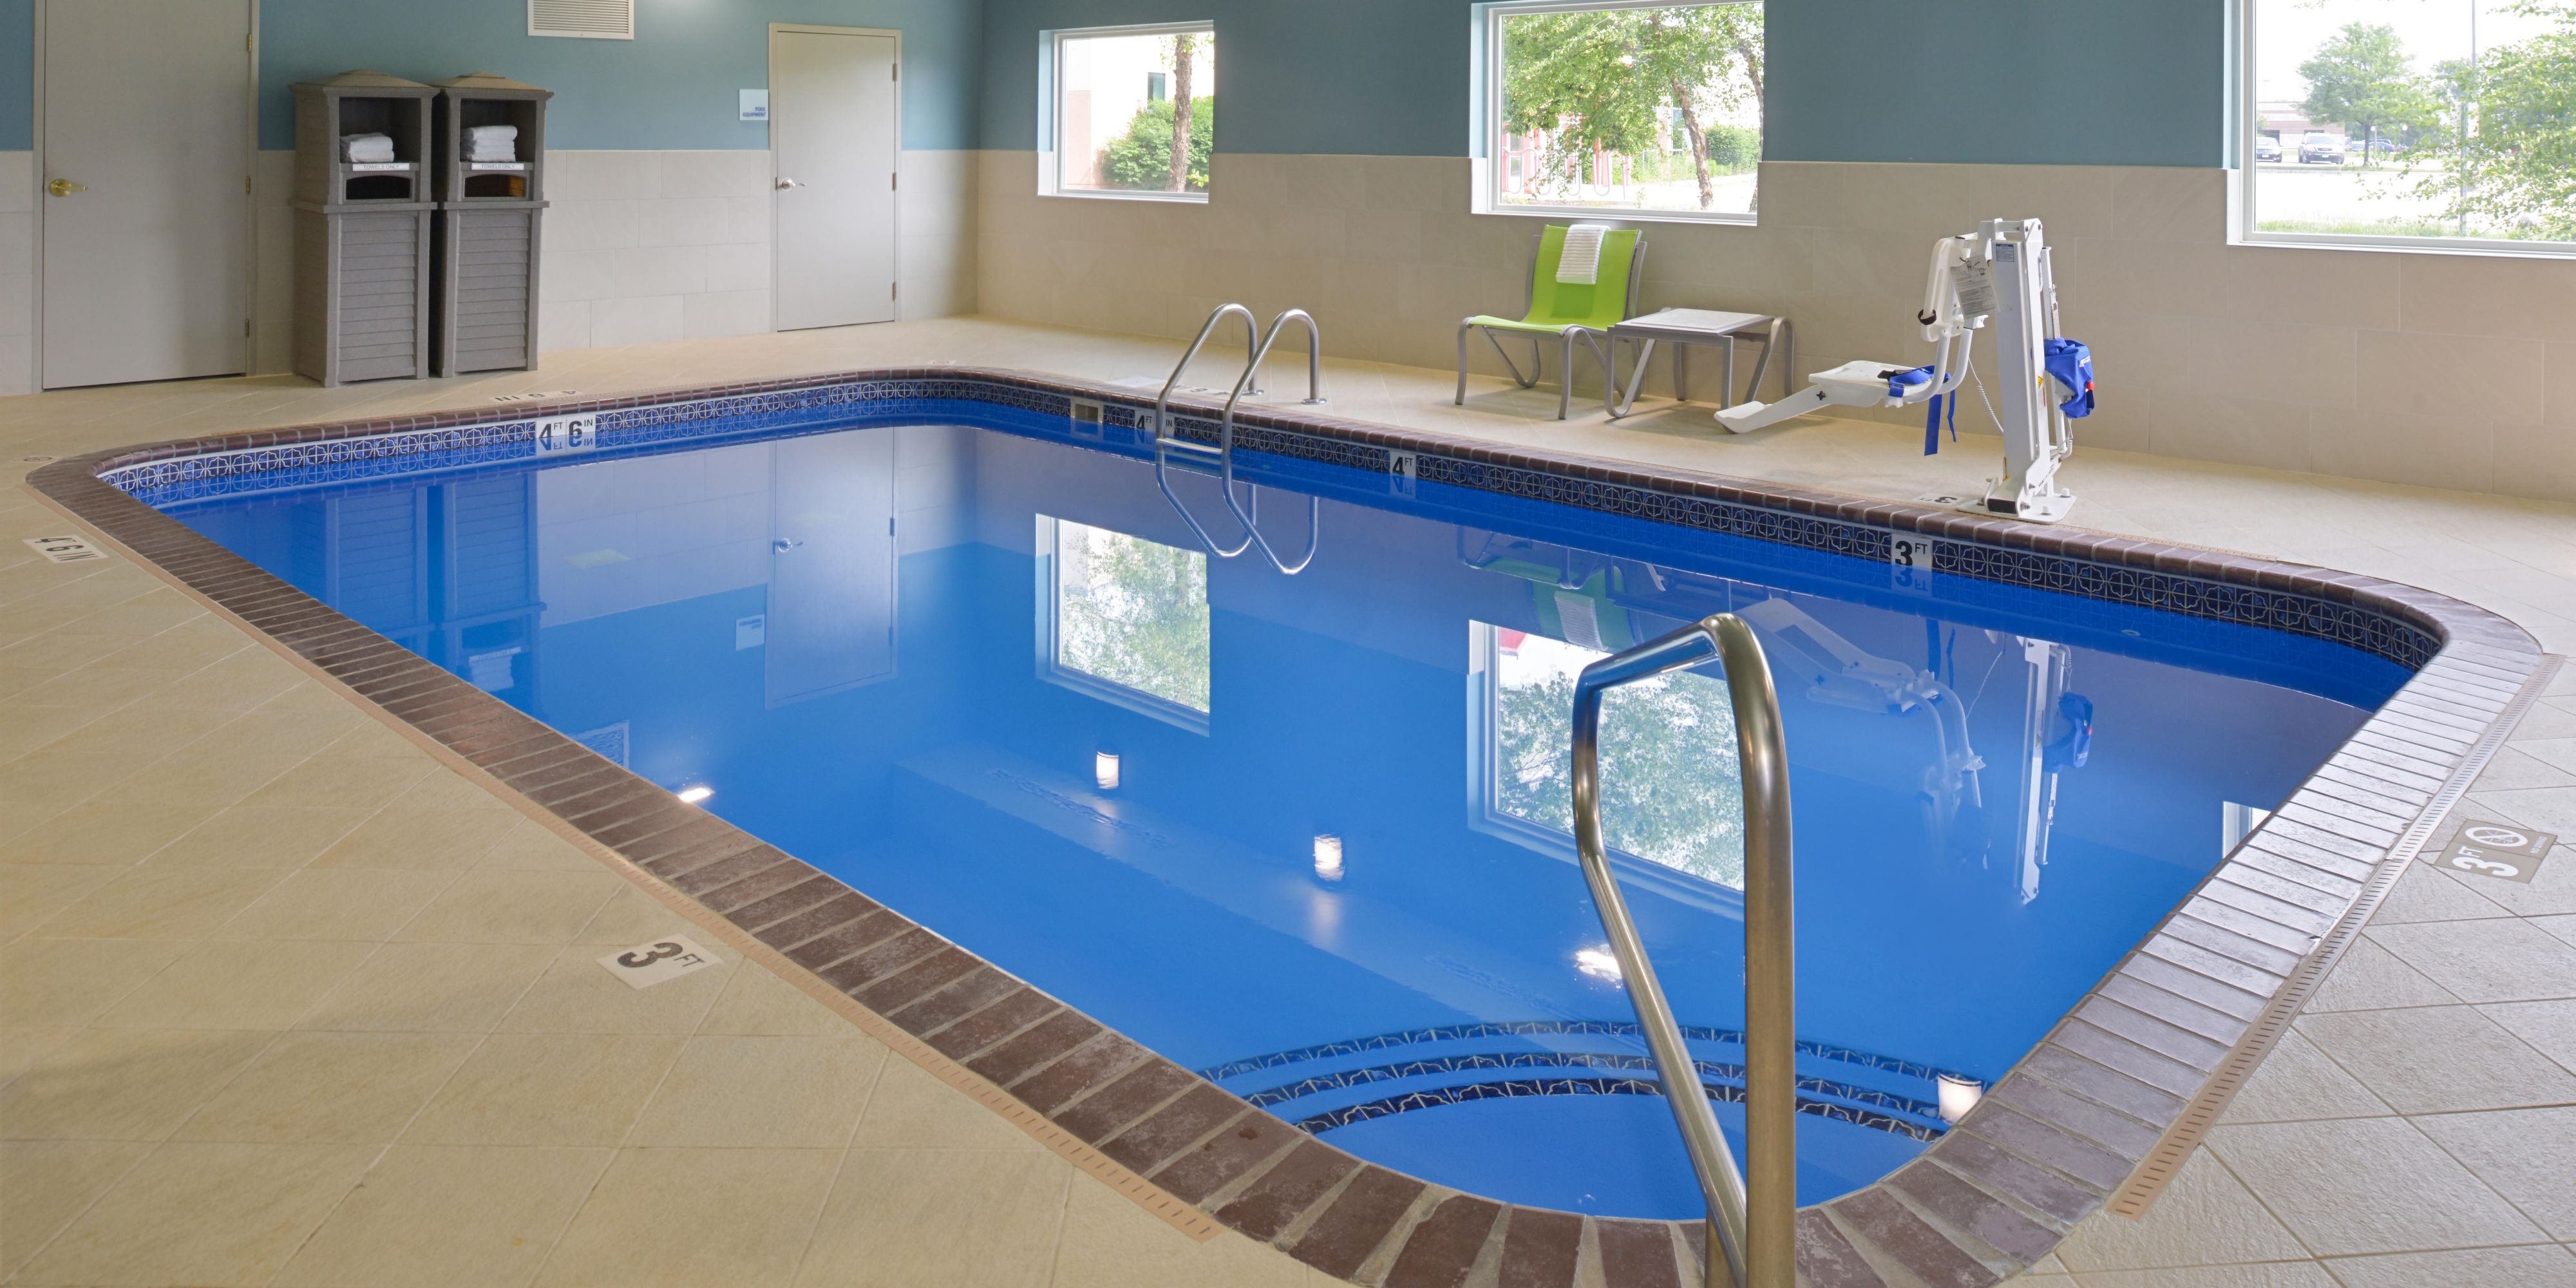 Bring the whole family and relax in our heated indoor pool. Open daily from 6am - 10pm.